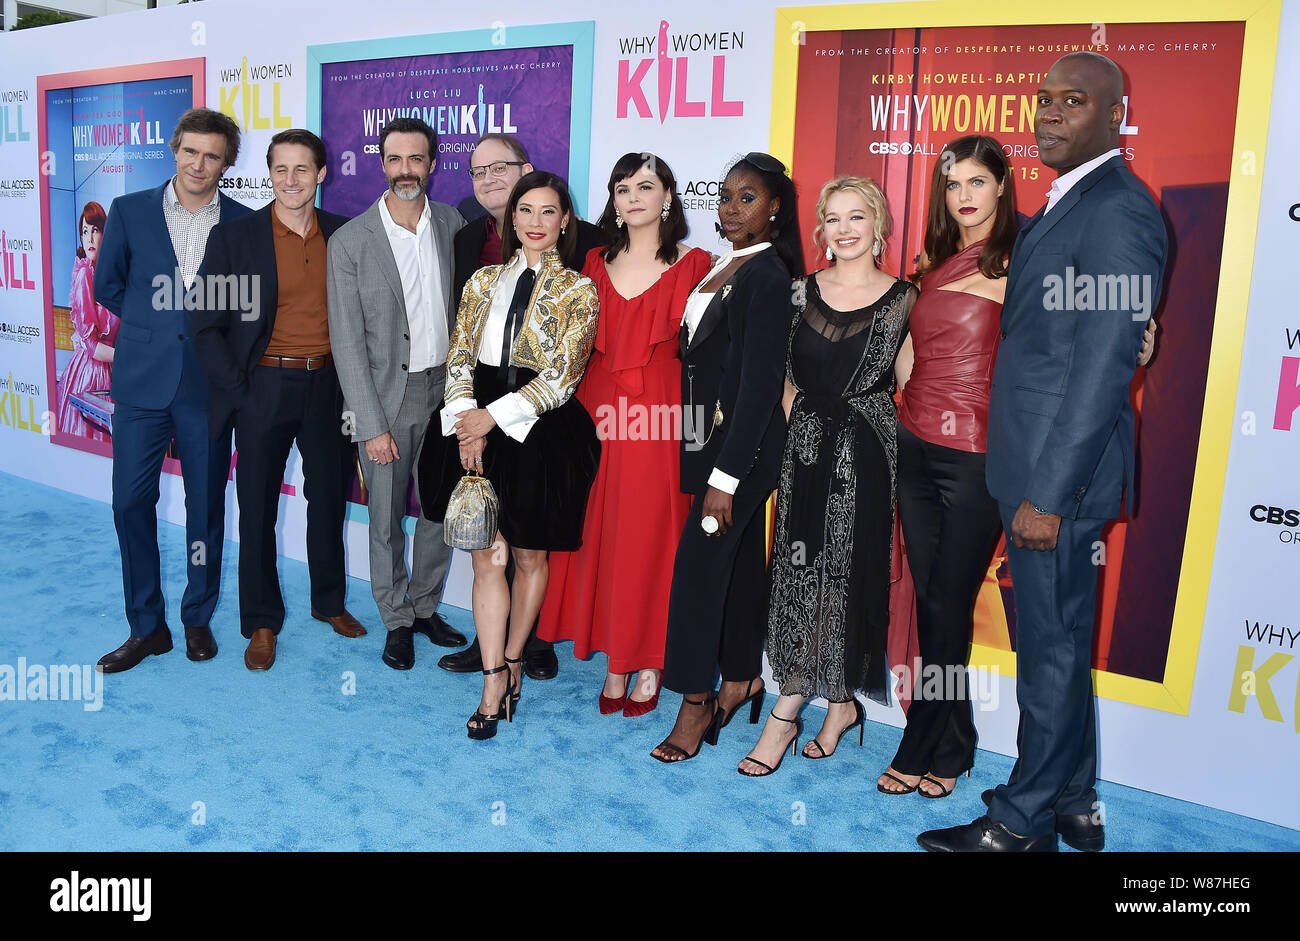 BEVERLY HILLS, CA - AUGUST 07: (L-R) Jack Davenport, Sam Jaeger, Reid Scott, Marc Cherry, Lucy Liu, Ginnifer Goodwin, Kirby Howell-Baptiste, Sadie Calvano, Alexandra Daddario and Kevin Daniels attend the LA Premiere of CBS All Access' 'Why Women Kill' at Wallis Annenberg Center for the Performing Arts on August 07, 2019 in Beverly Hills, California. Stock Photo